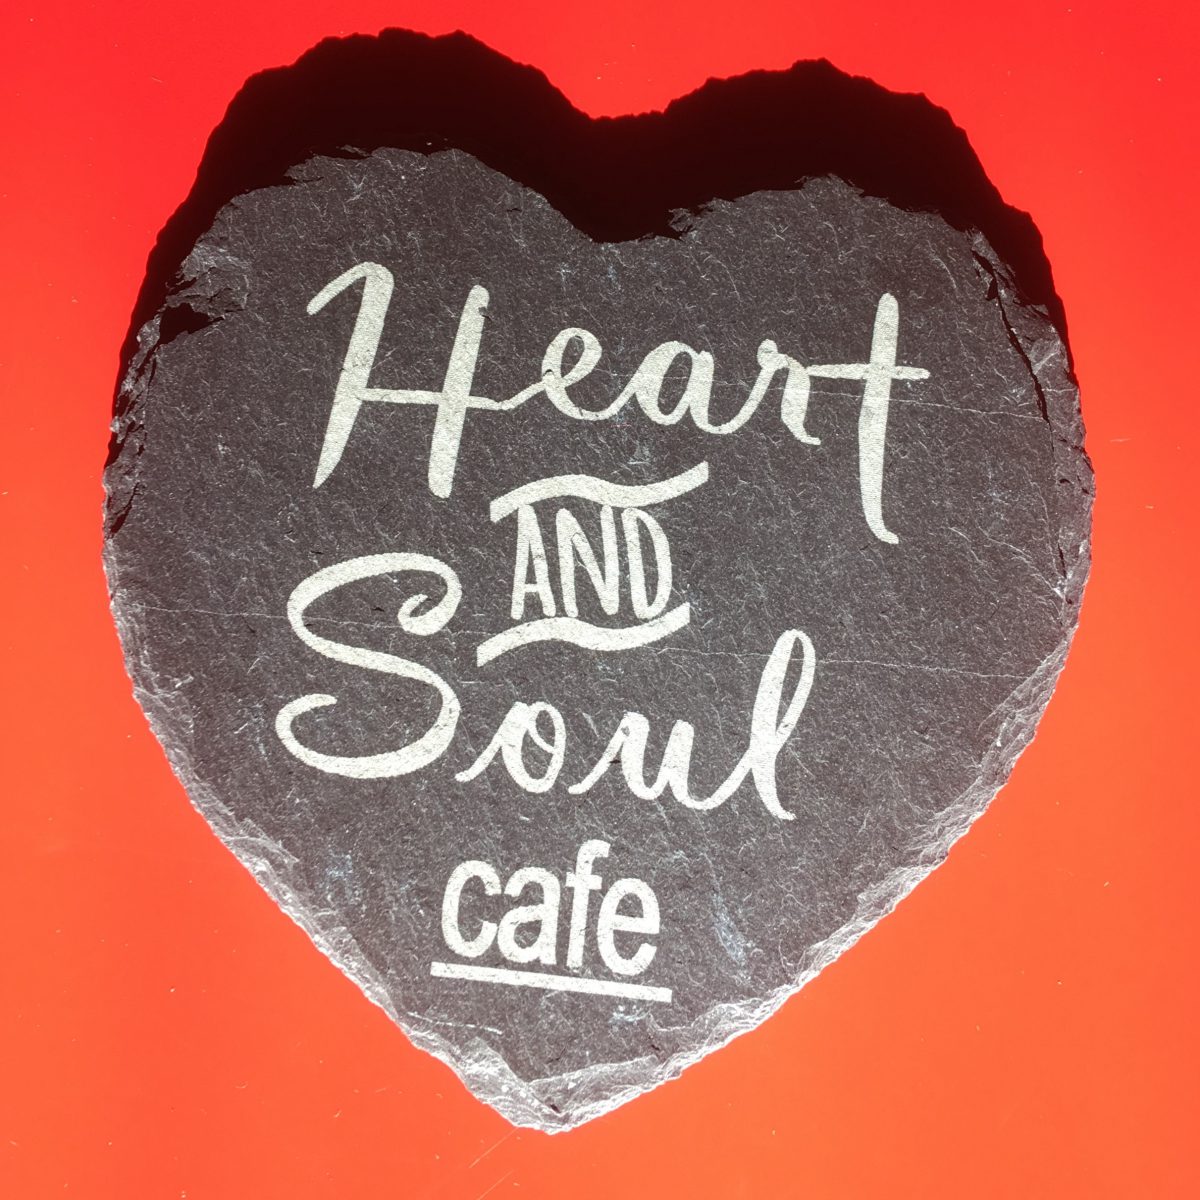 Heart shaped stone with 'Heart and Soul Cafe' written on it